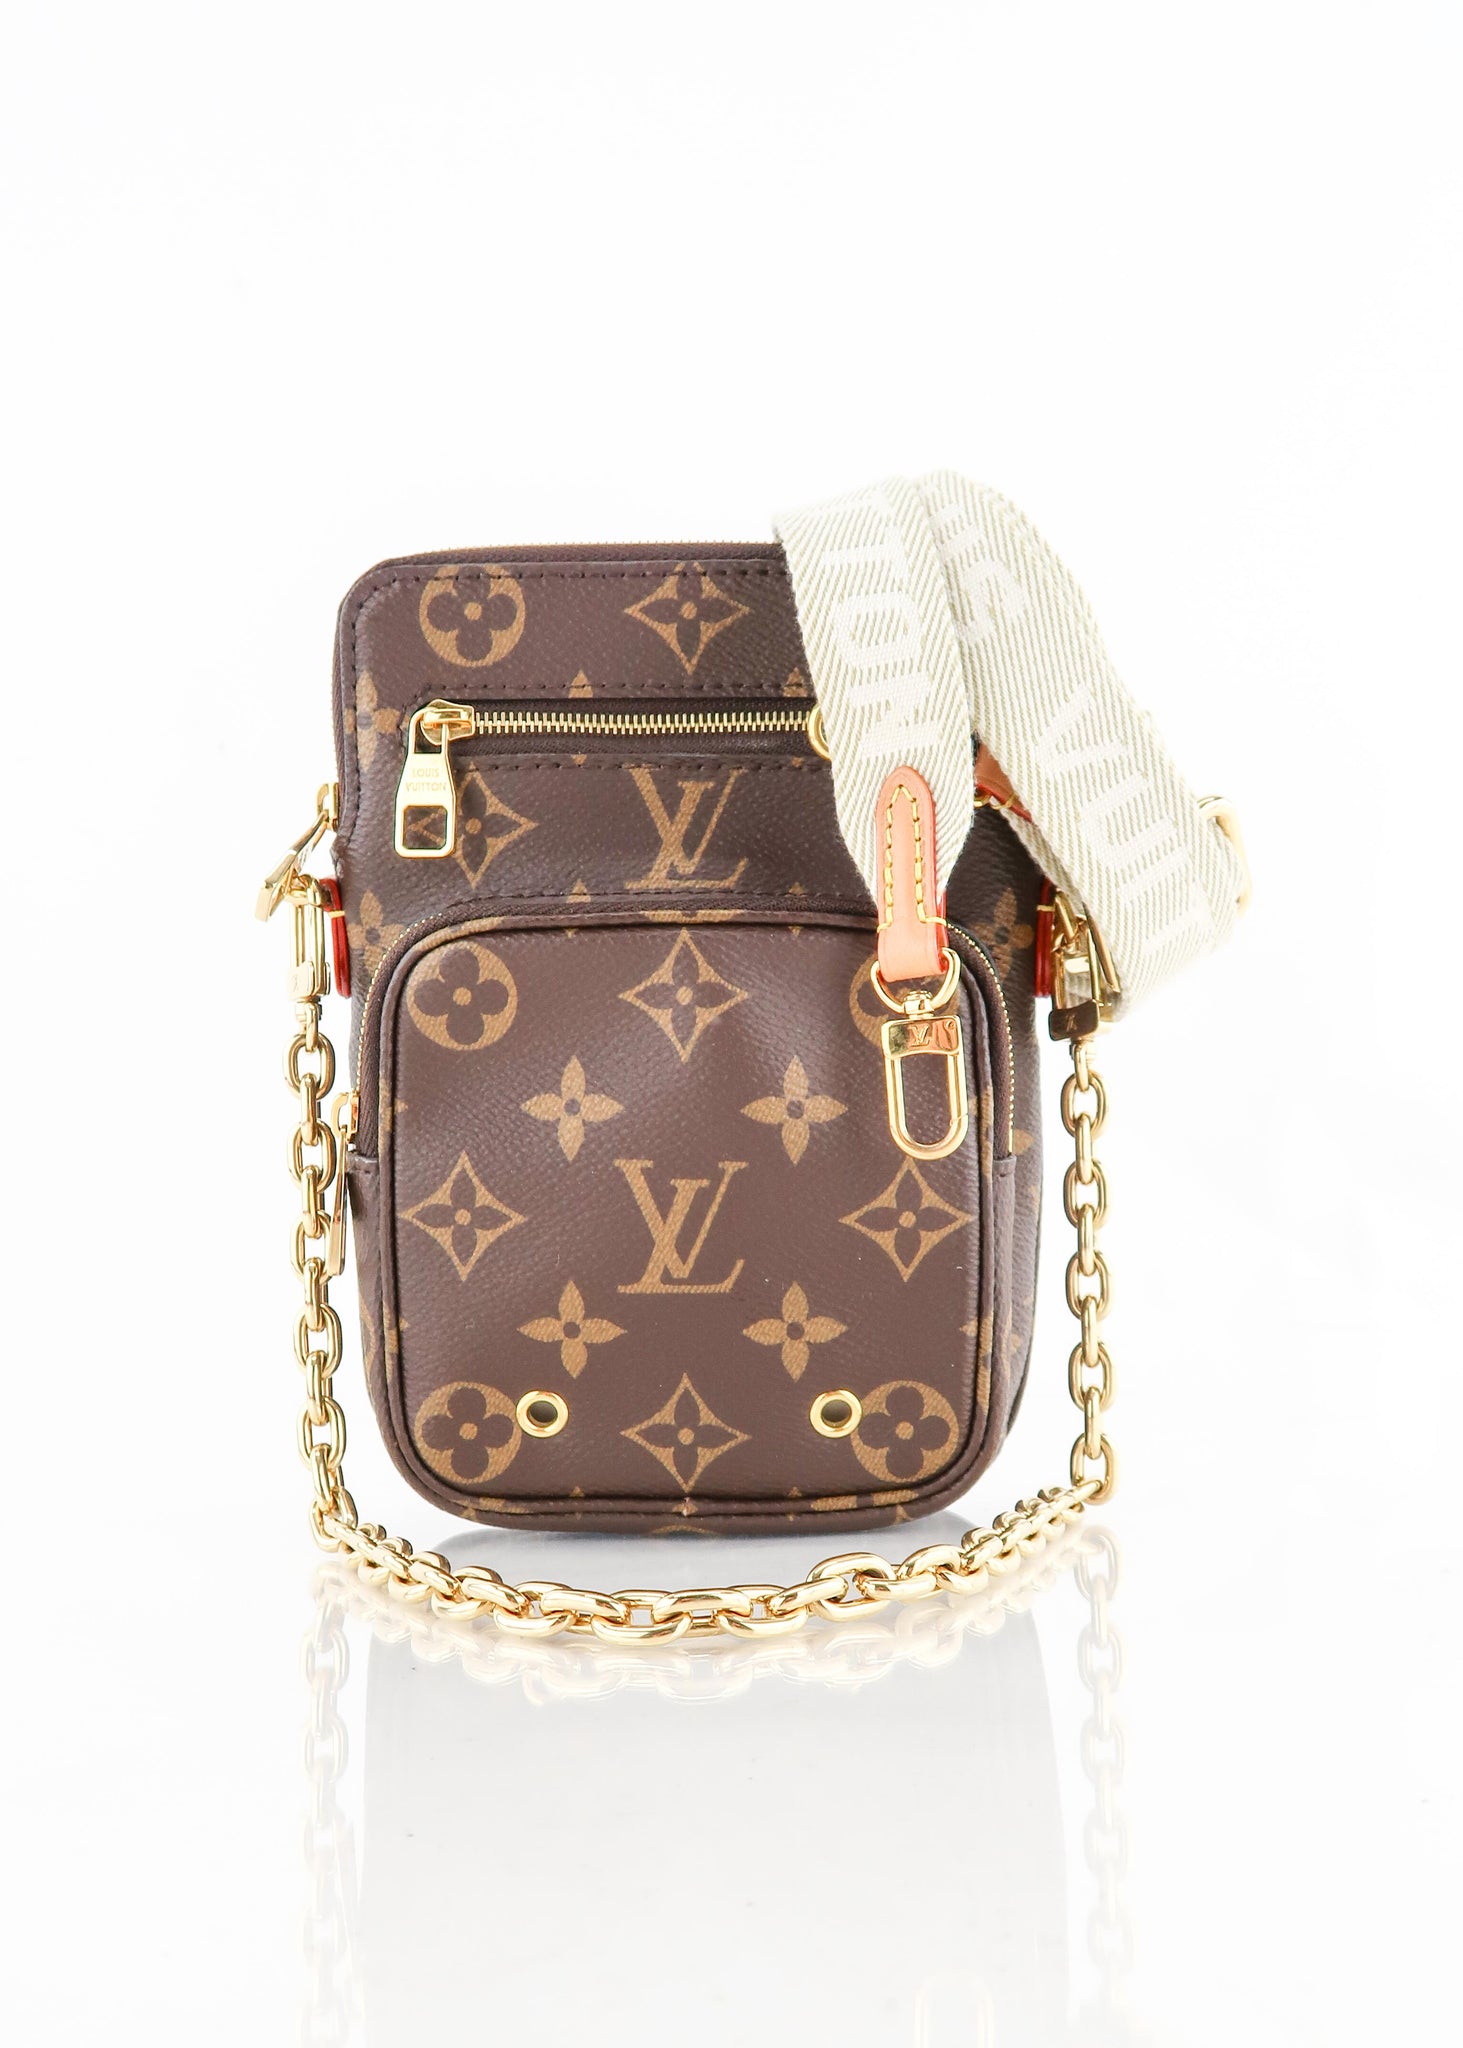 How long is the gold chain on the louis vuitton utility phone